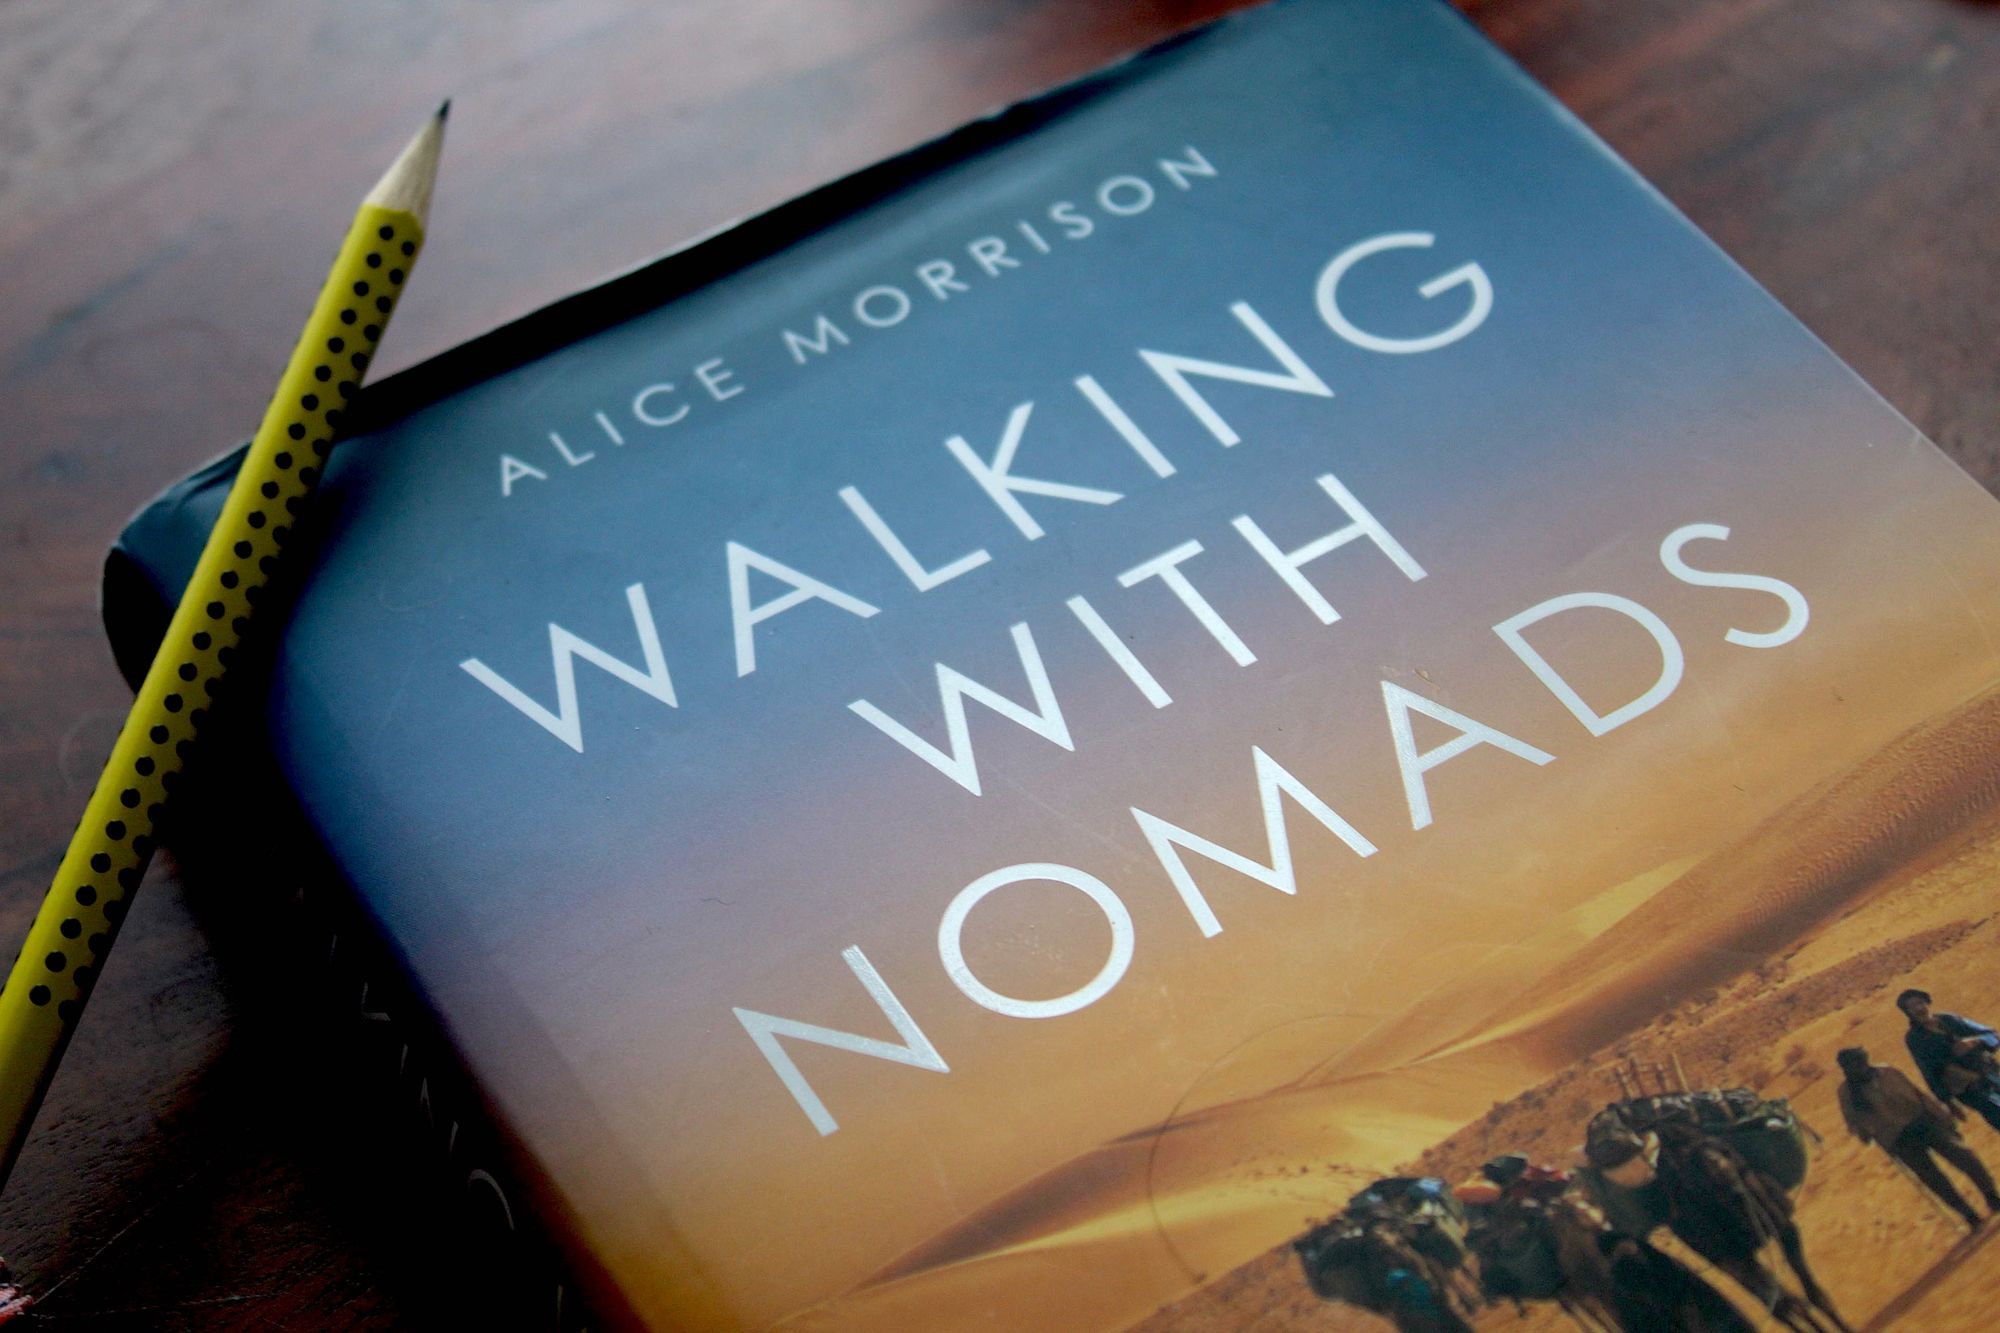 A book portrait of Alice Morrison's Walking with Nomads.